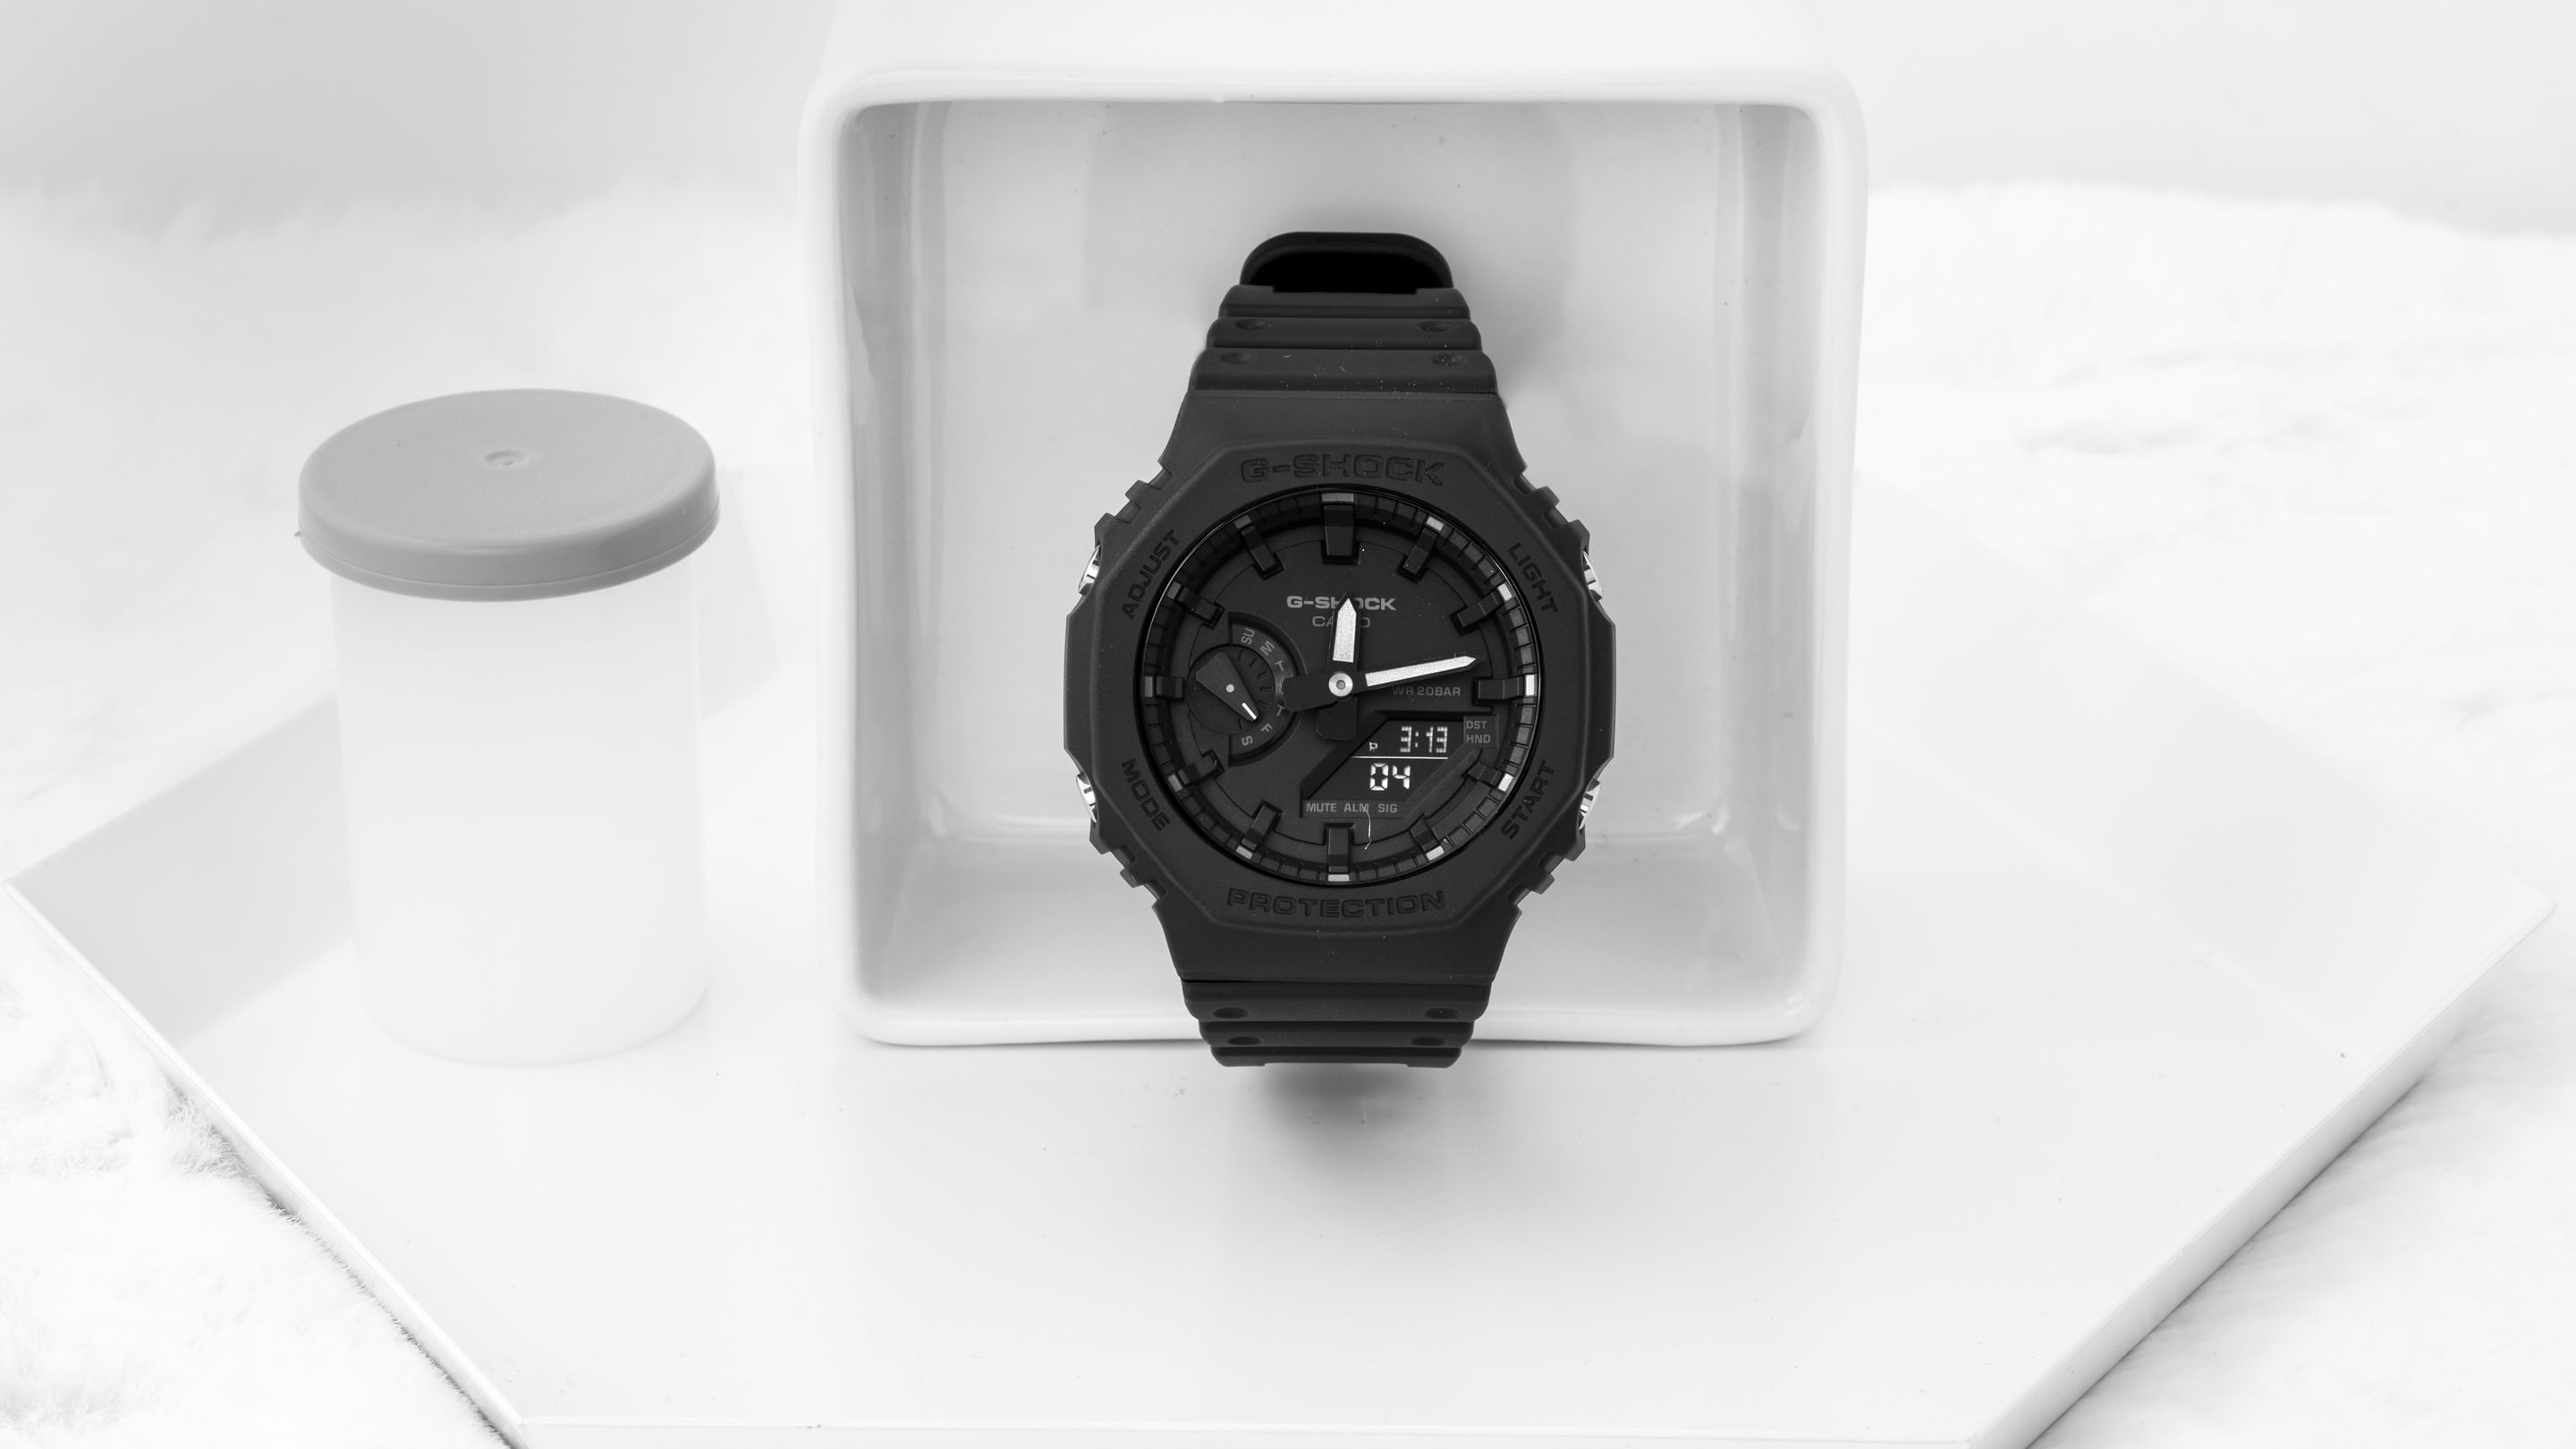 This All-Black Casio Is Tough Guy Take on the Oak - Bloomberg